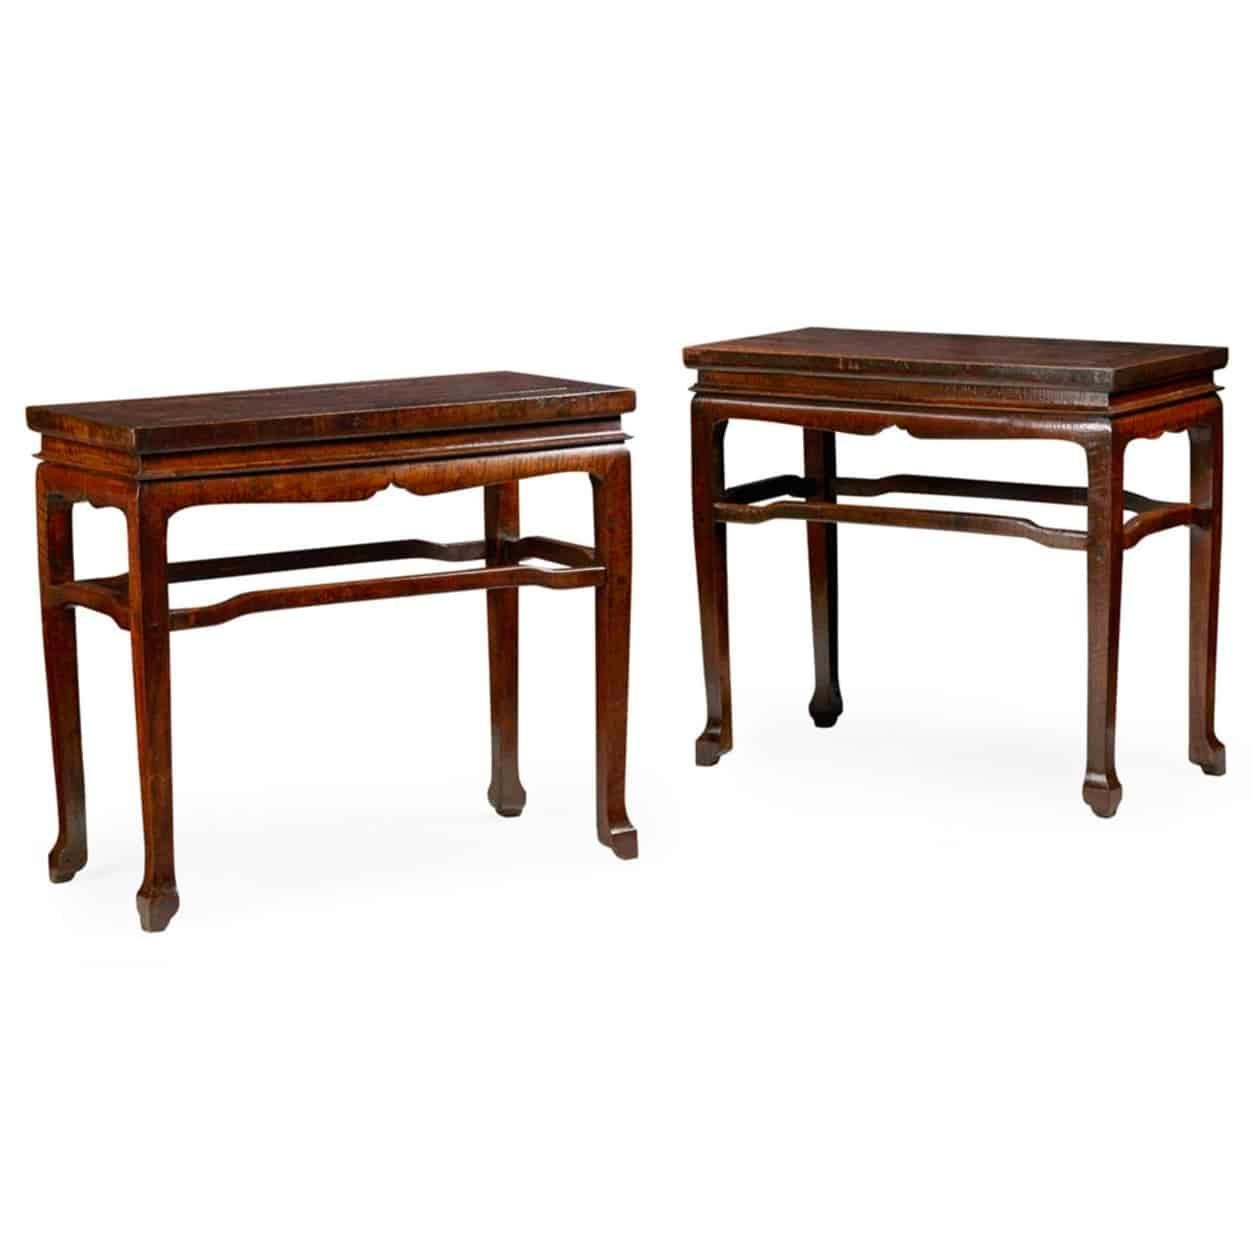 A rare pair of 18th century Chinese longyanmu hardwood side tables, the panel tops above recessed friezes and shaped aprons, raised on square straight legs ending in shaped block feet and joined by arched stretchers.

Furniture constructed from